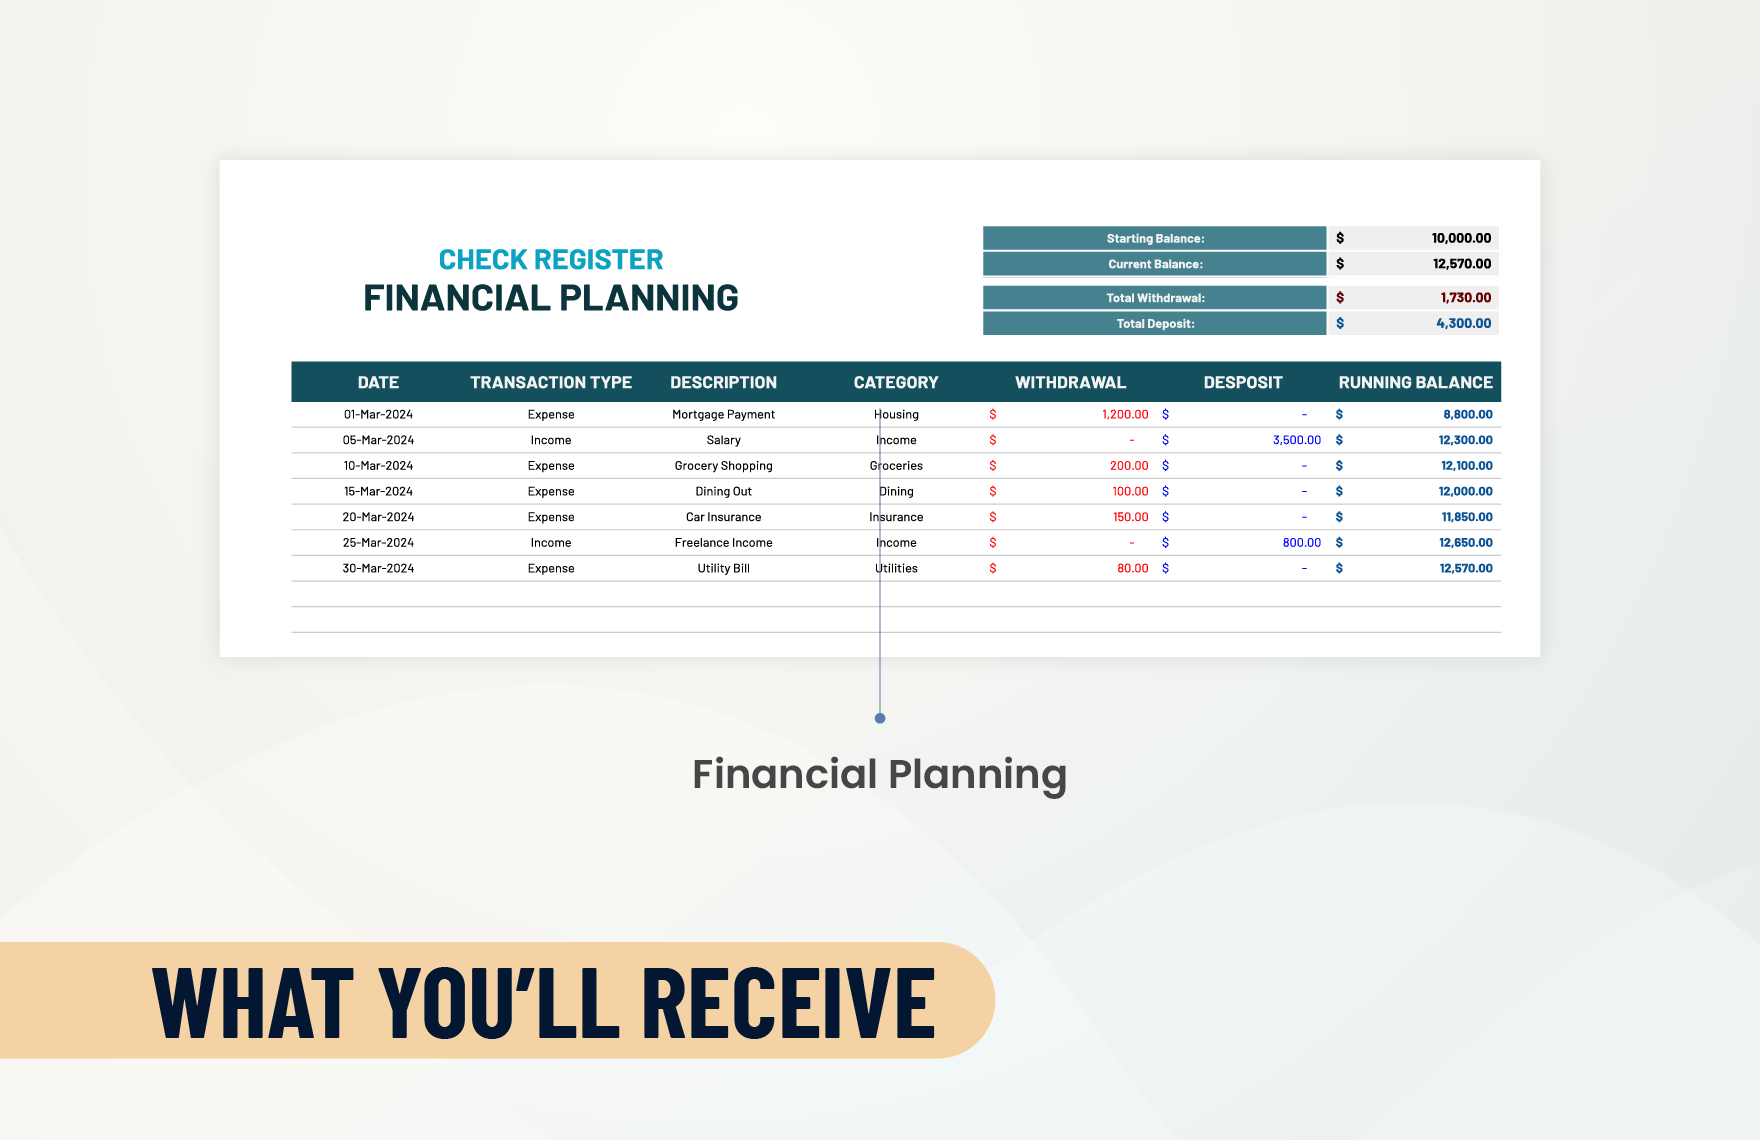 Check Register for Financial Planning Template